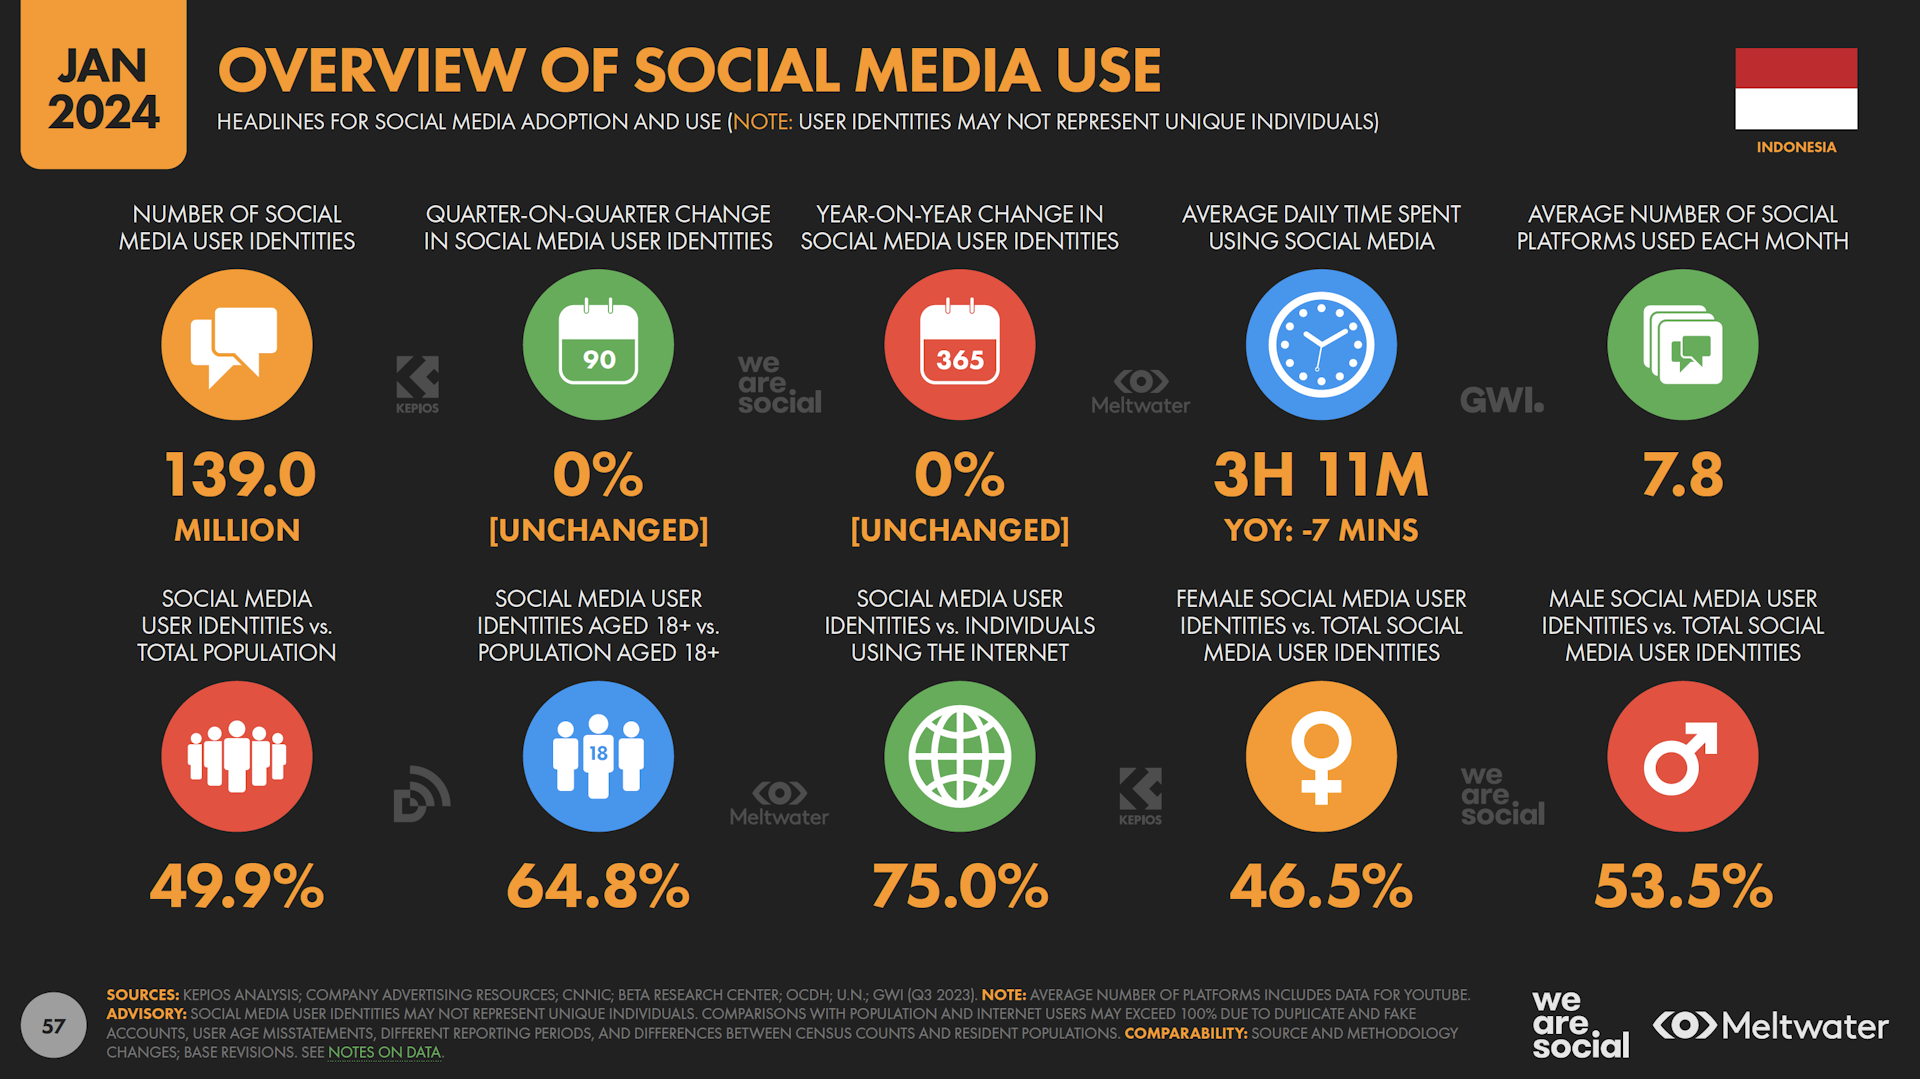 Overview of social media use based on Global Digital Report 2024 for Indonesia